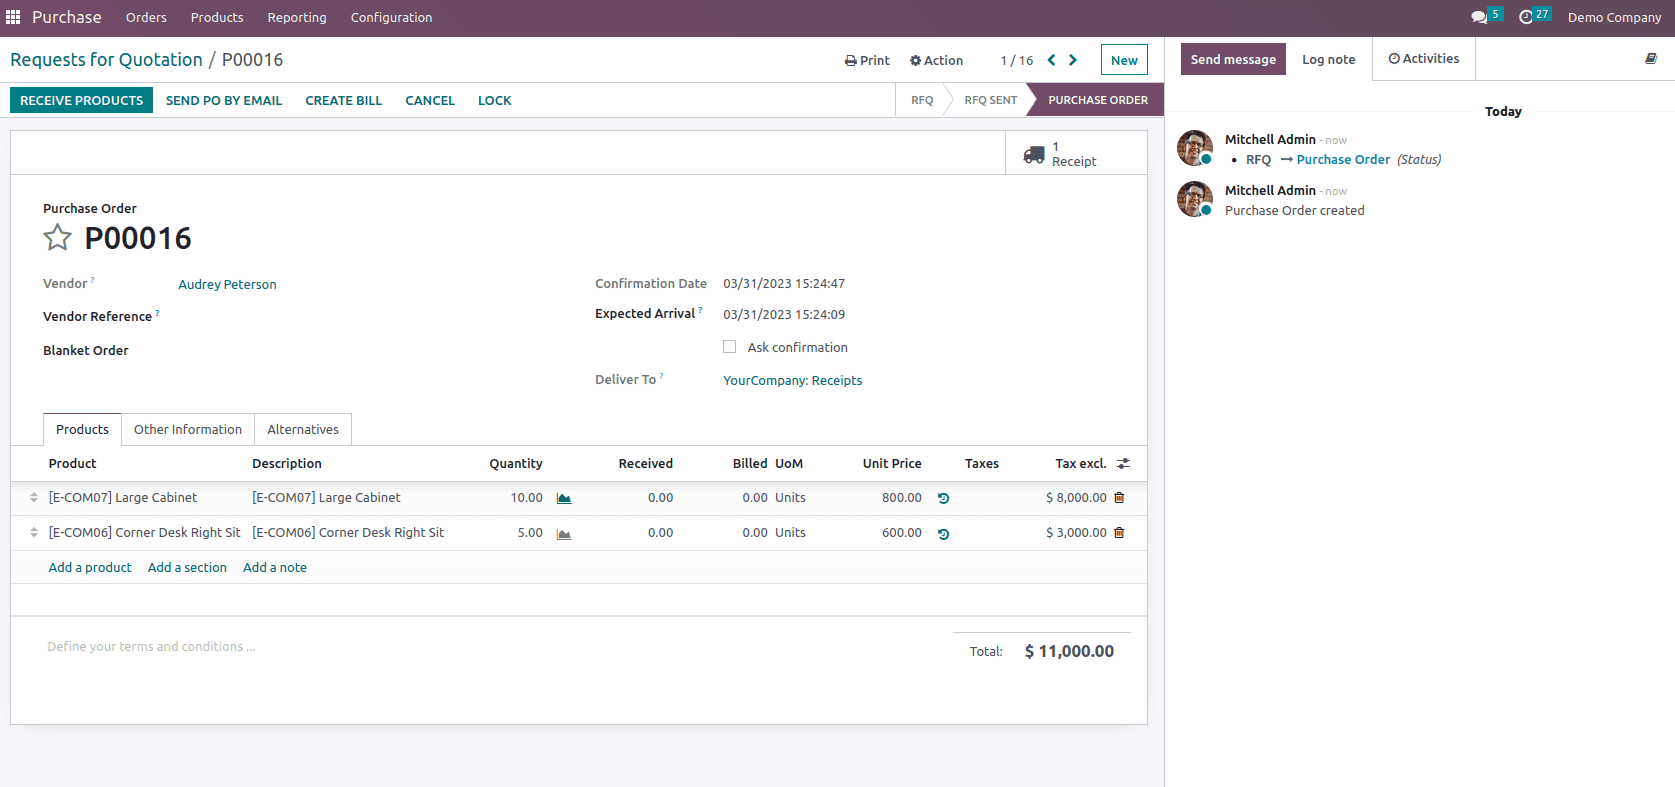 How Scraping Affects the Inventory Value in Odoo 16-cybrosys